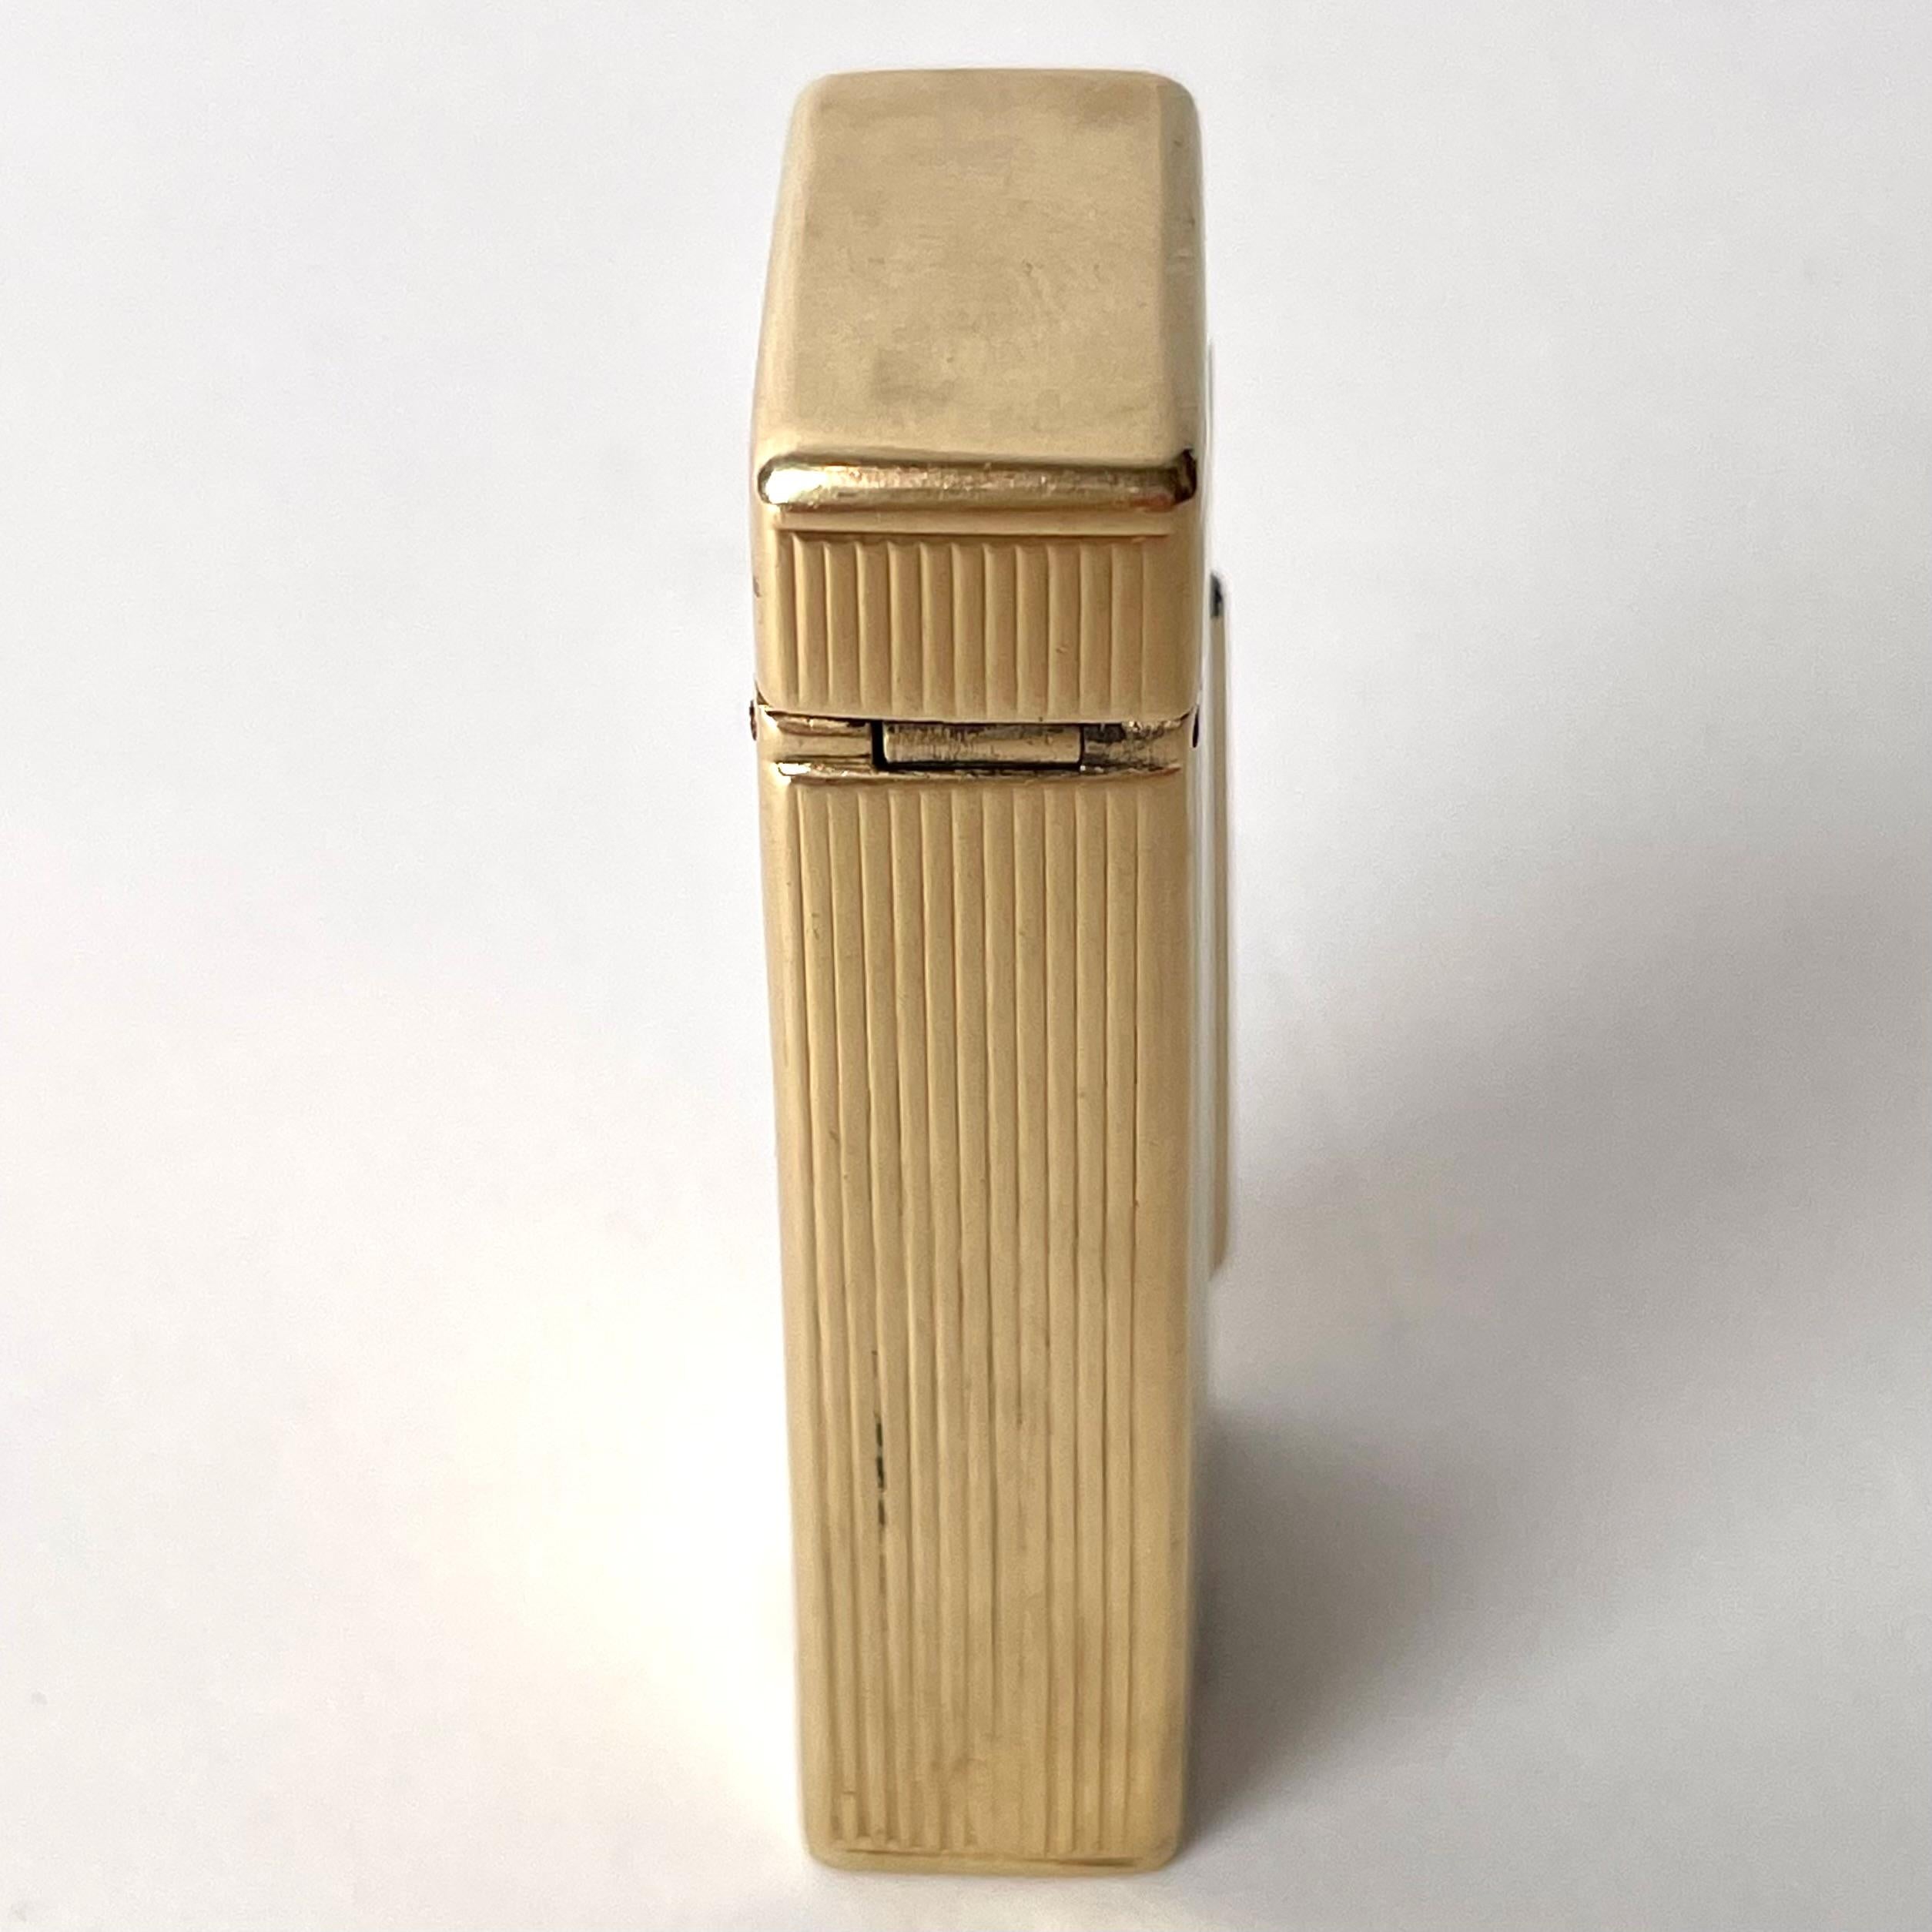 English Dunhill 14 Carat Gold Cigarette Gasoline Lighter from 1940s-1950s